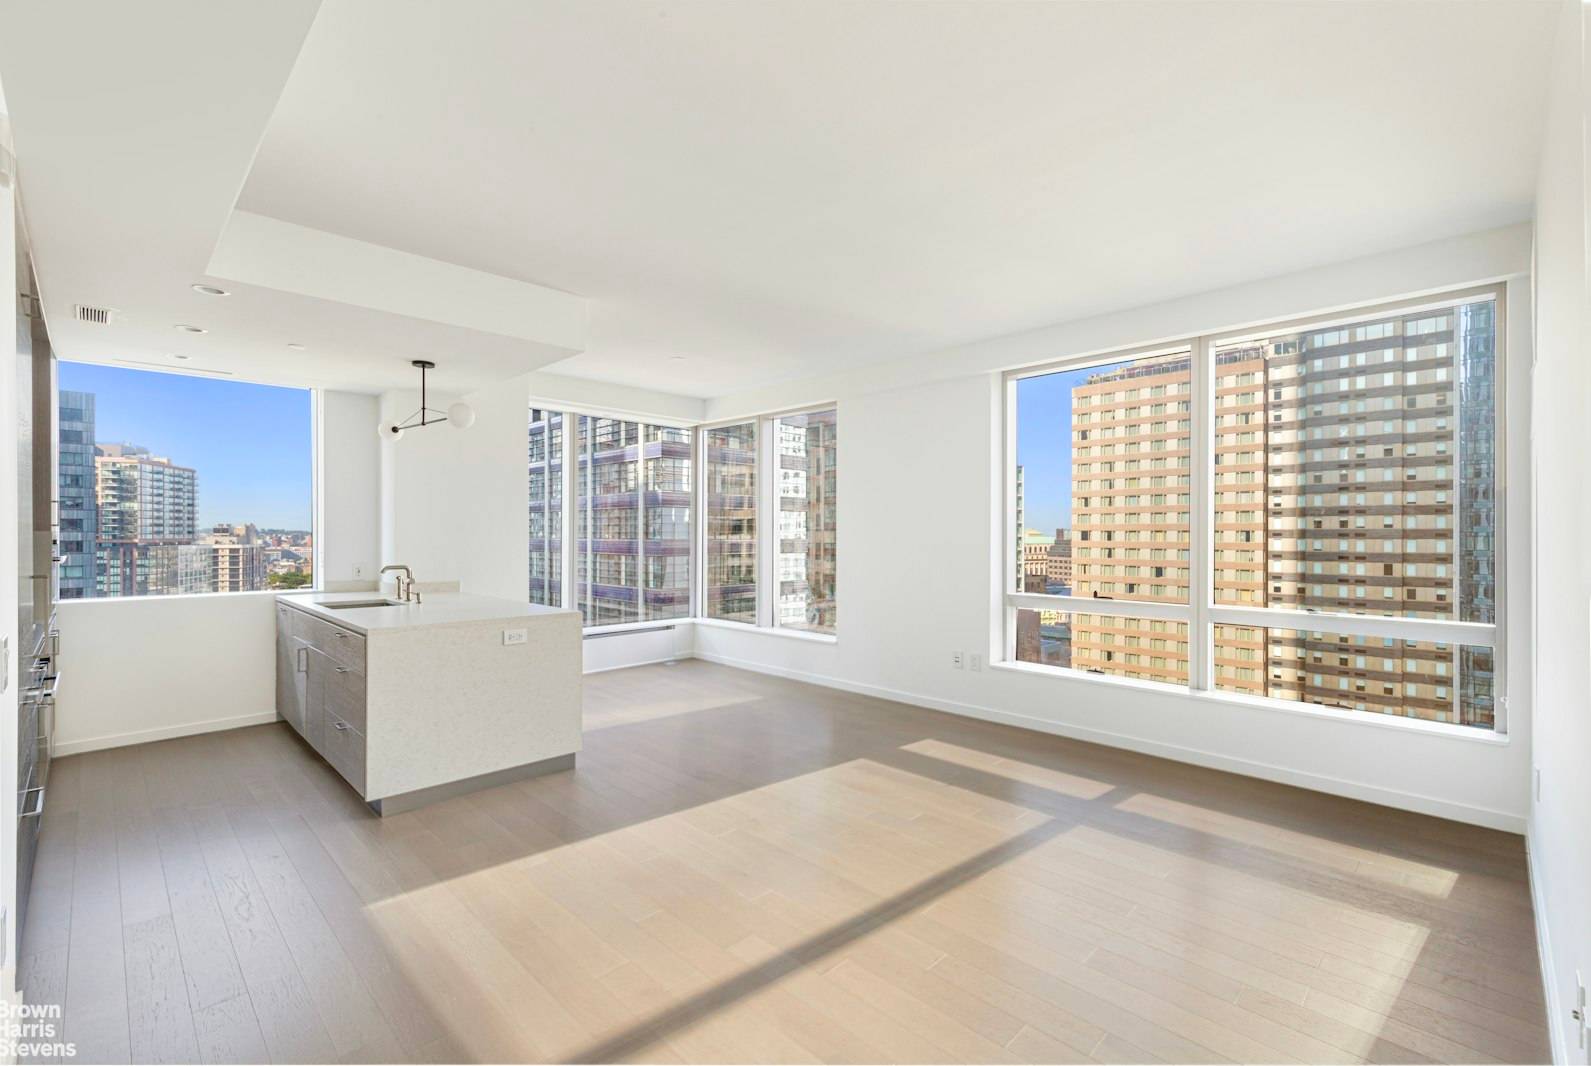 ELEGANT 2 BEDROOM APARTMENT IN DOWNTOWN BROOKLYNWelcome to a luxurious 18th floor residence spanning 1159 sq ft, with a coveted southwestern exposure, bathing the space in abundant natural light.